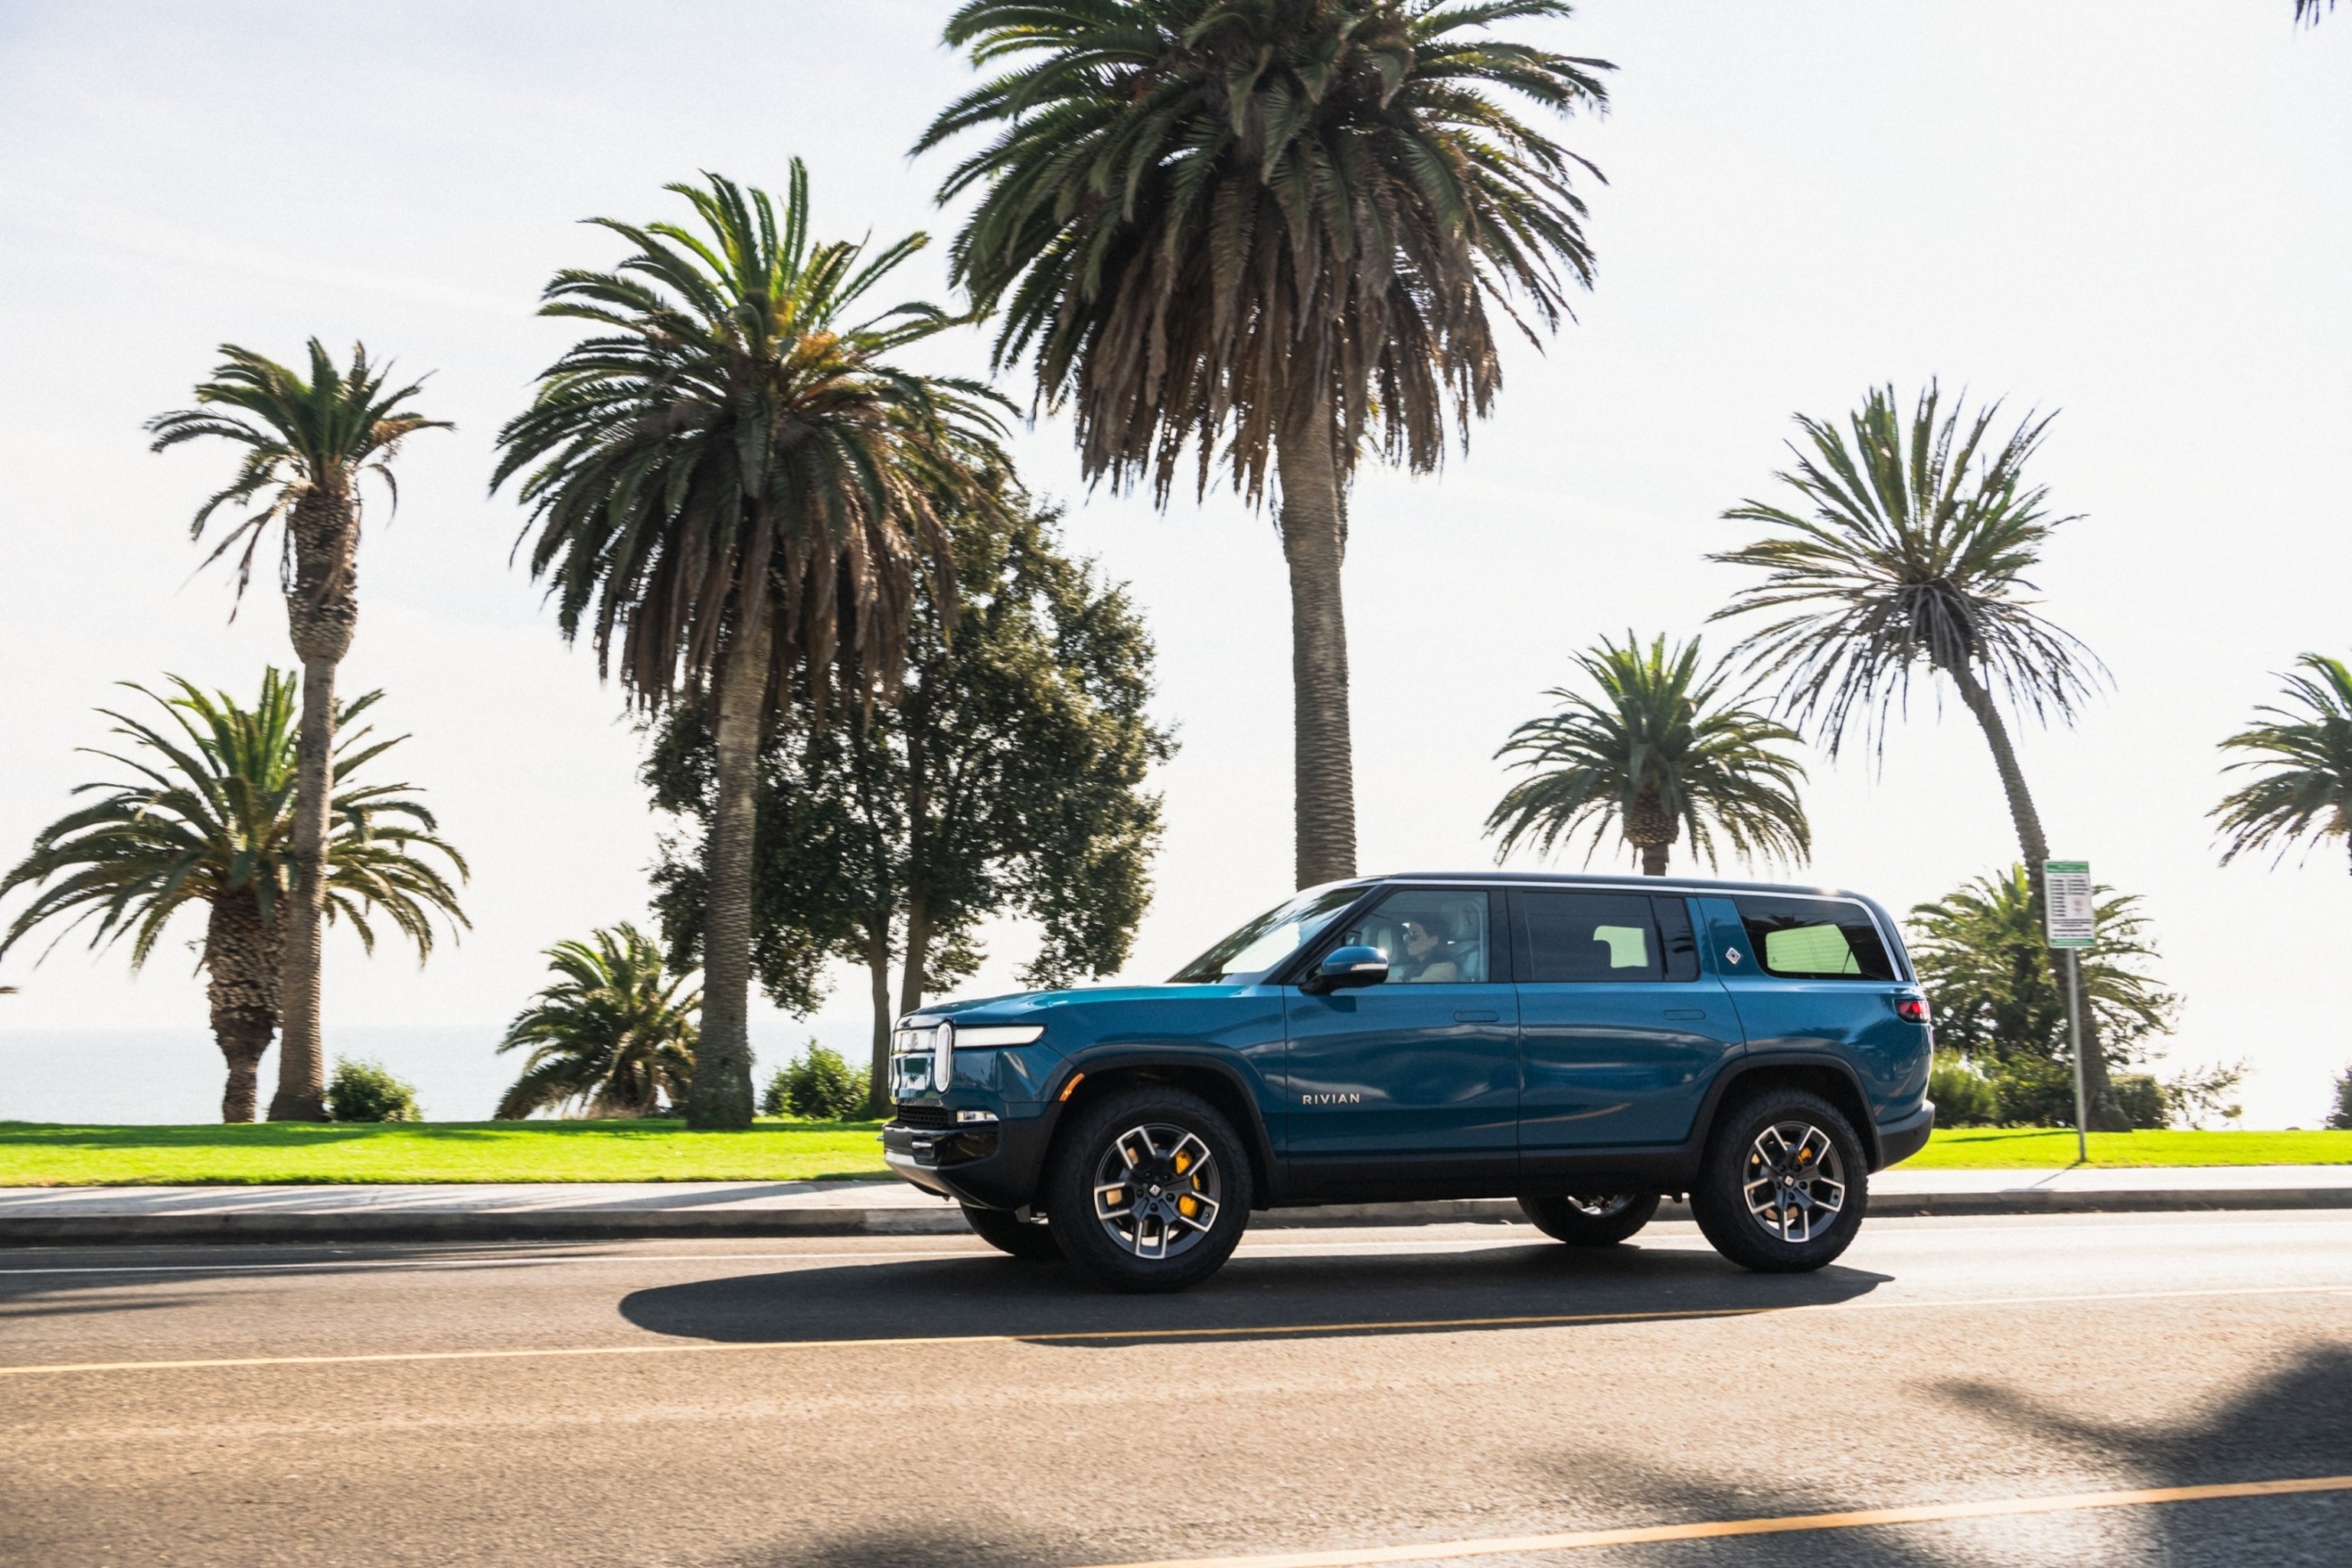 PHOTO: Rivian's bestselling model is its three-row R1S SUV.